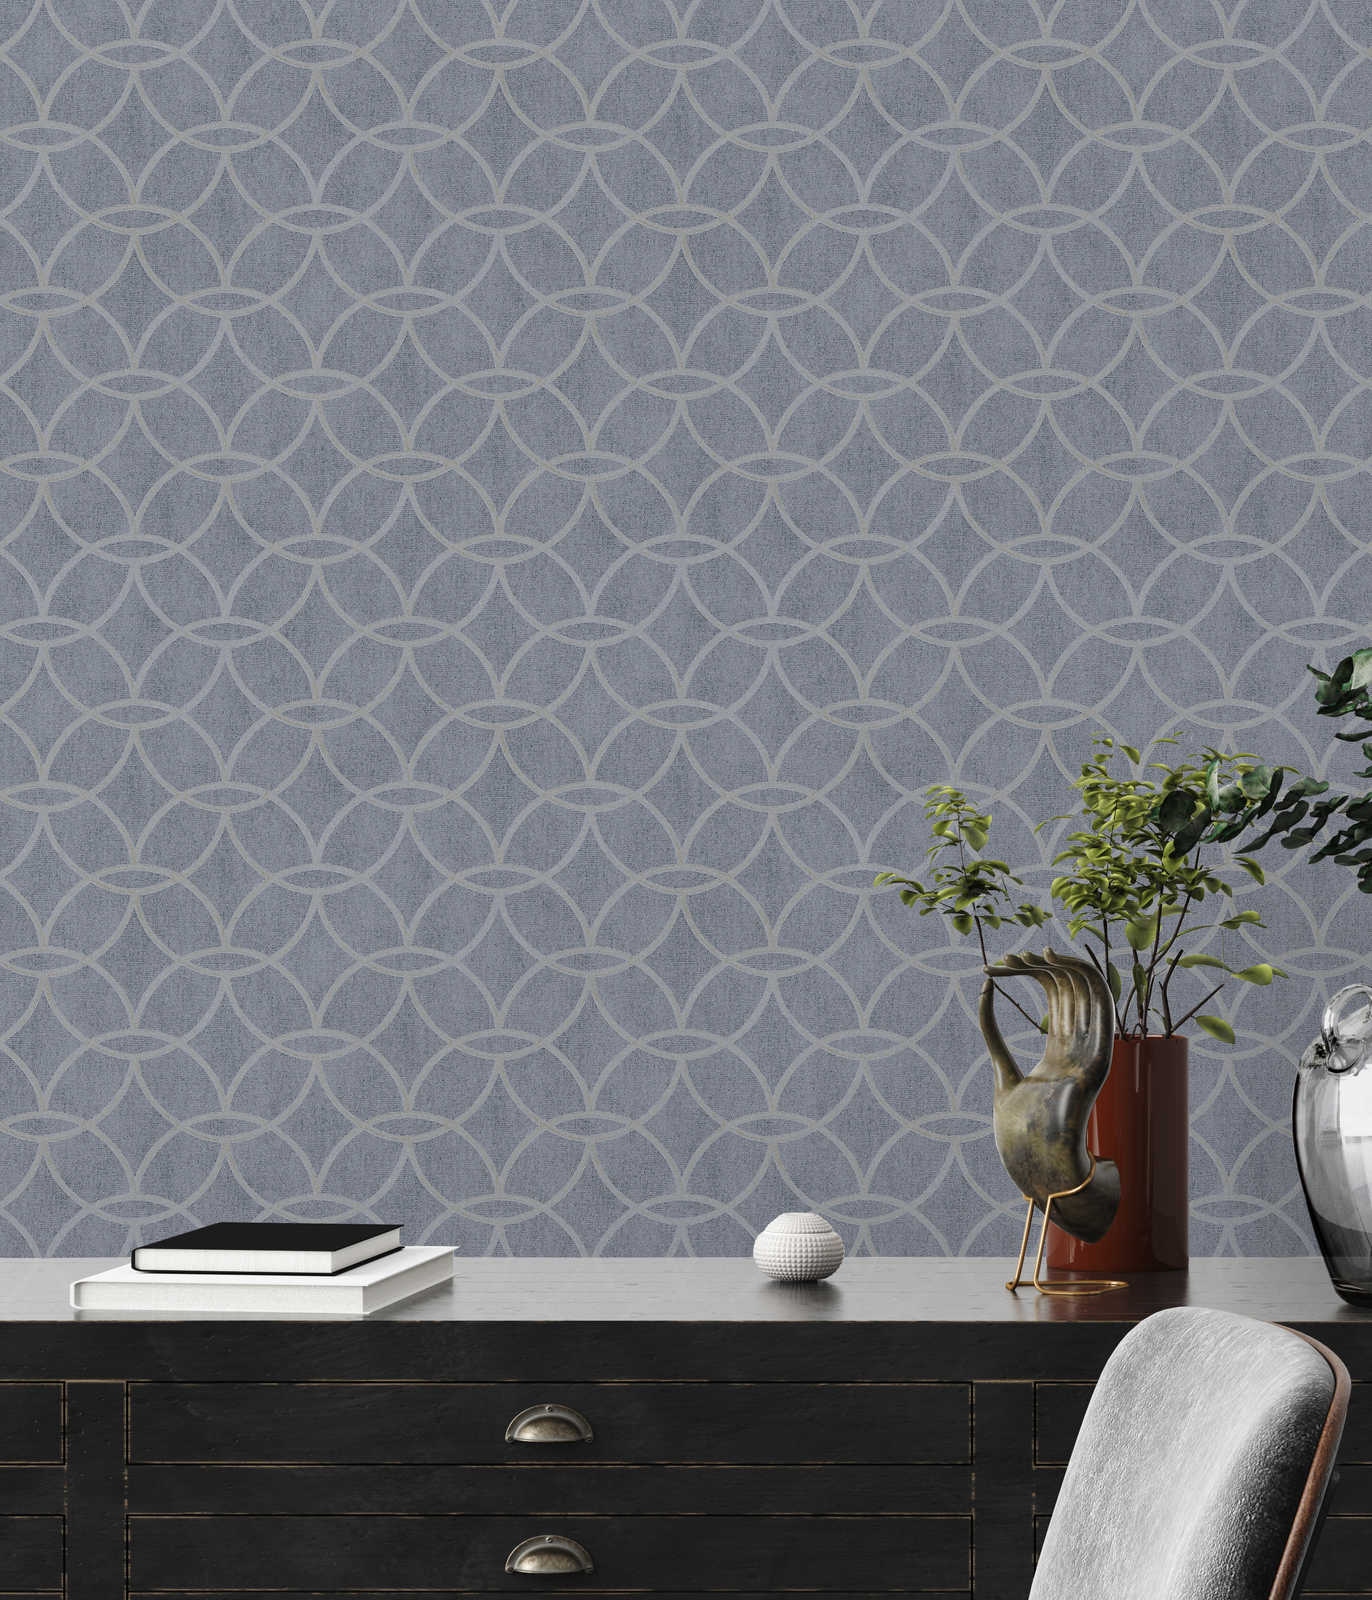             Pattern wallpaper non-woven with geometric design & shimmer effect - blue, grey
        